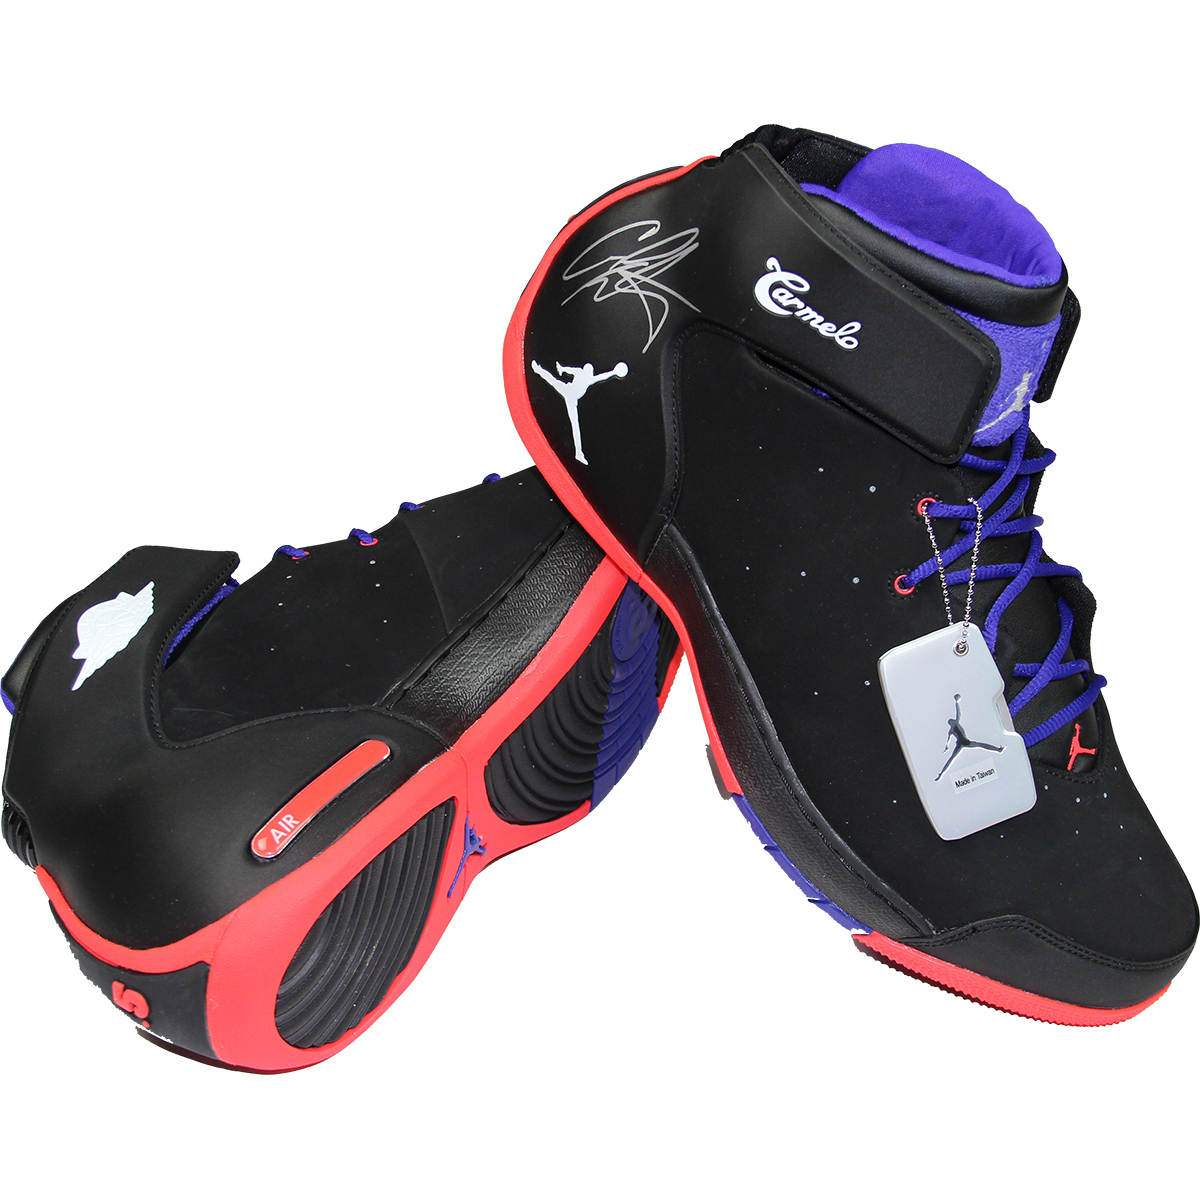 Carmelo Anthony Game Worn Autographed Jordan Melo 1.5